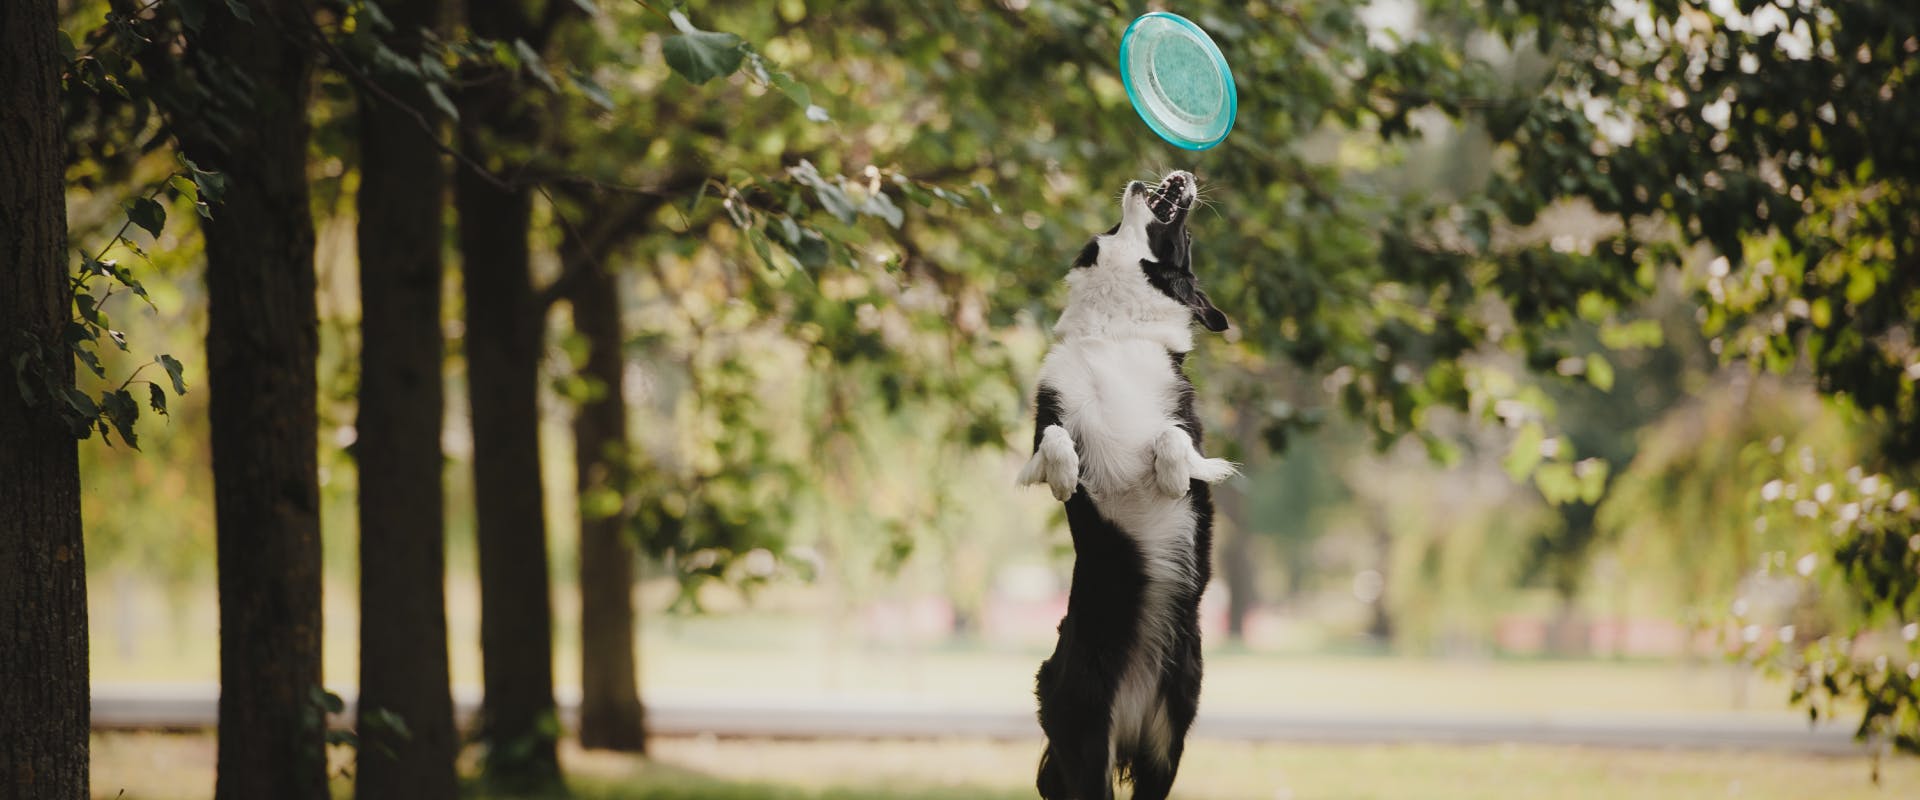 a border collie active dog jumping straight up in the air to catch a blue frisbee in a park